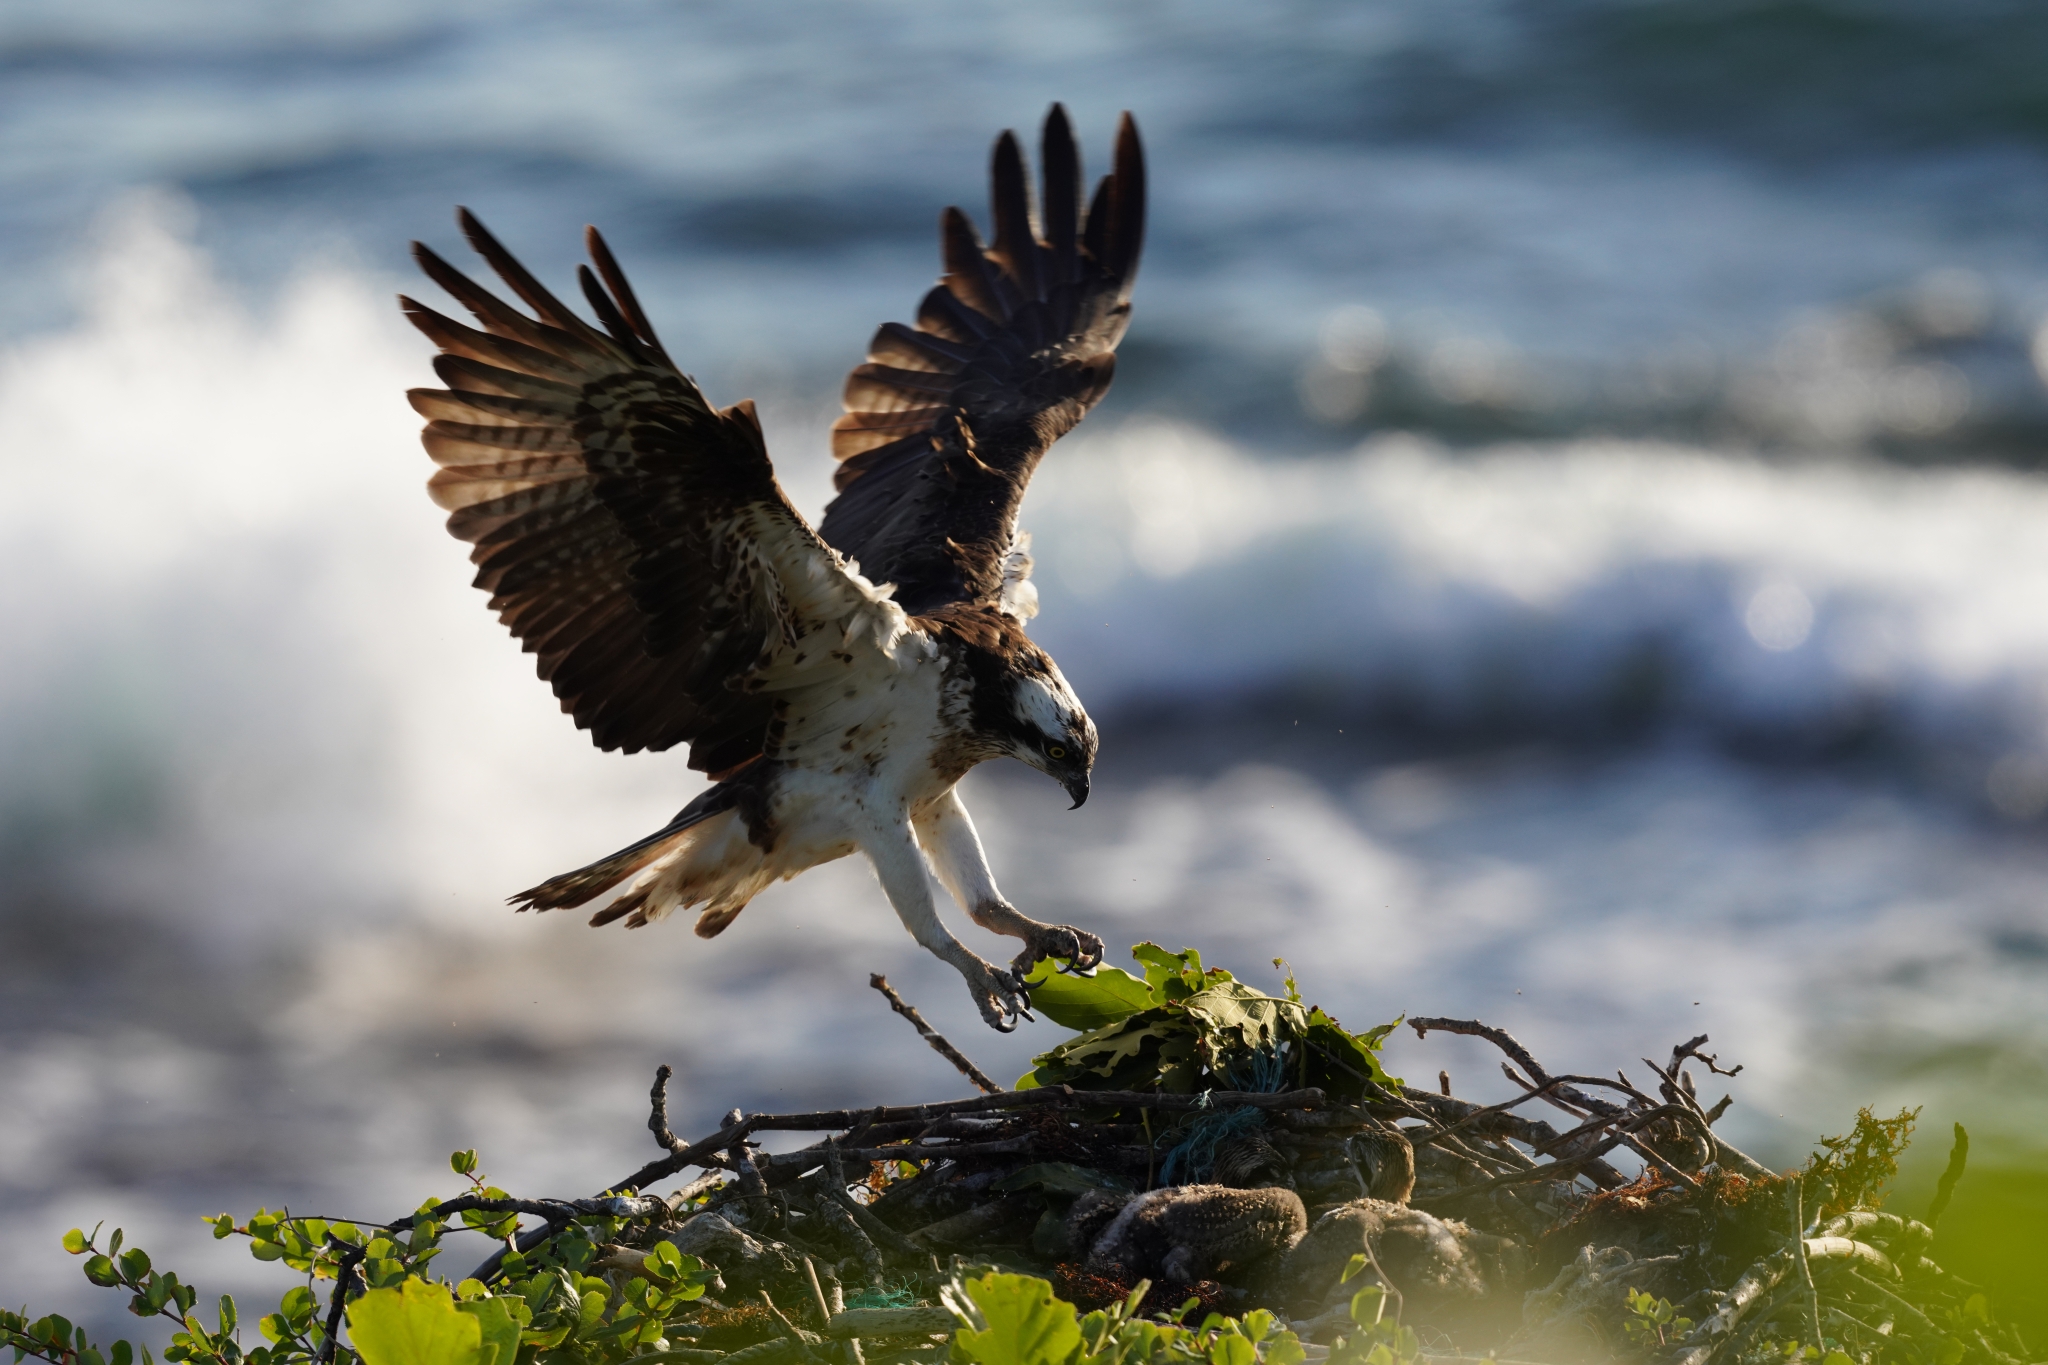 Bird of prey landing on a nest on the ground with breaking waves in a bokeh background